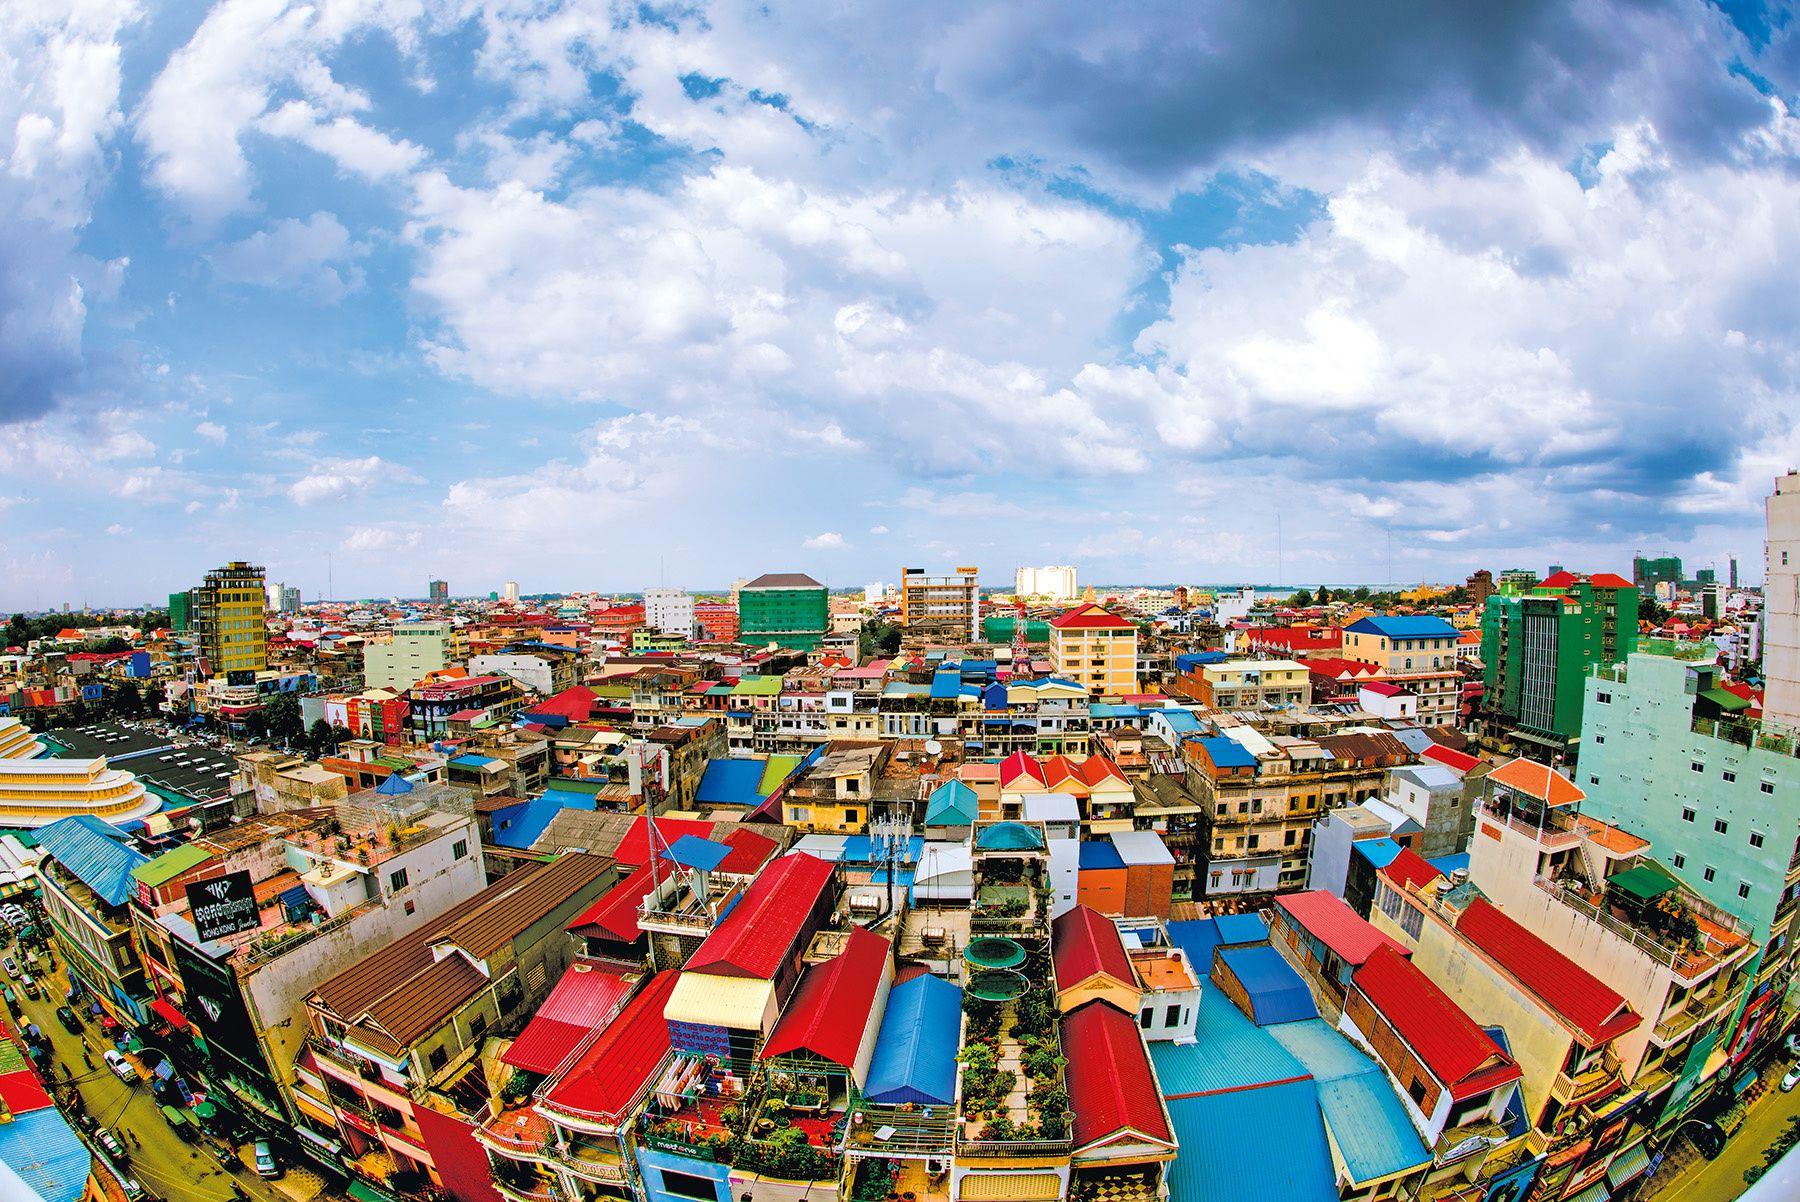 A view of Cambodia's capital, Phnom Penh - one of the fast-growing cities in Asia.Photo credits: Iwan Bagus/IFC